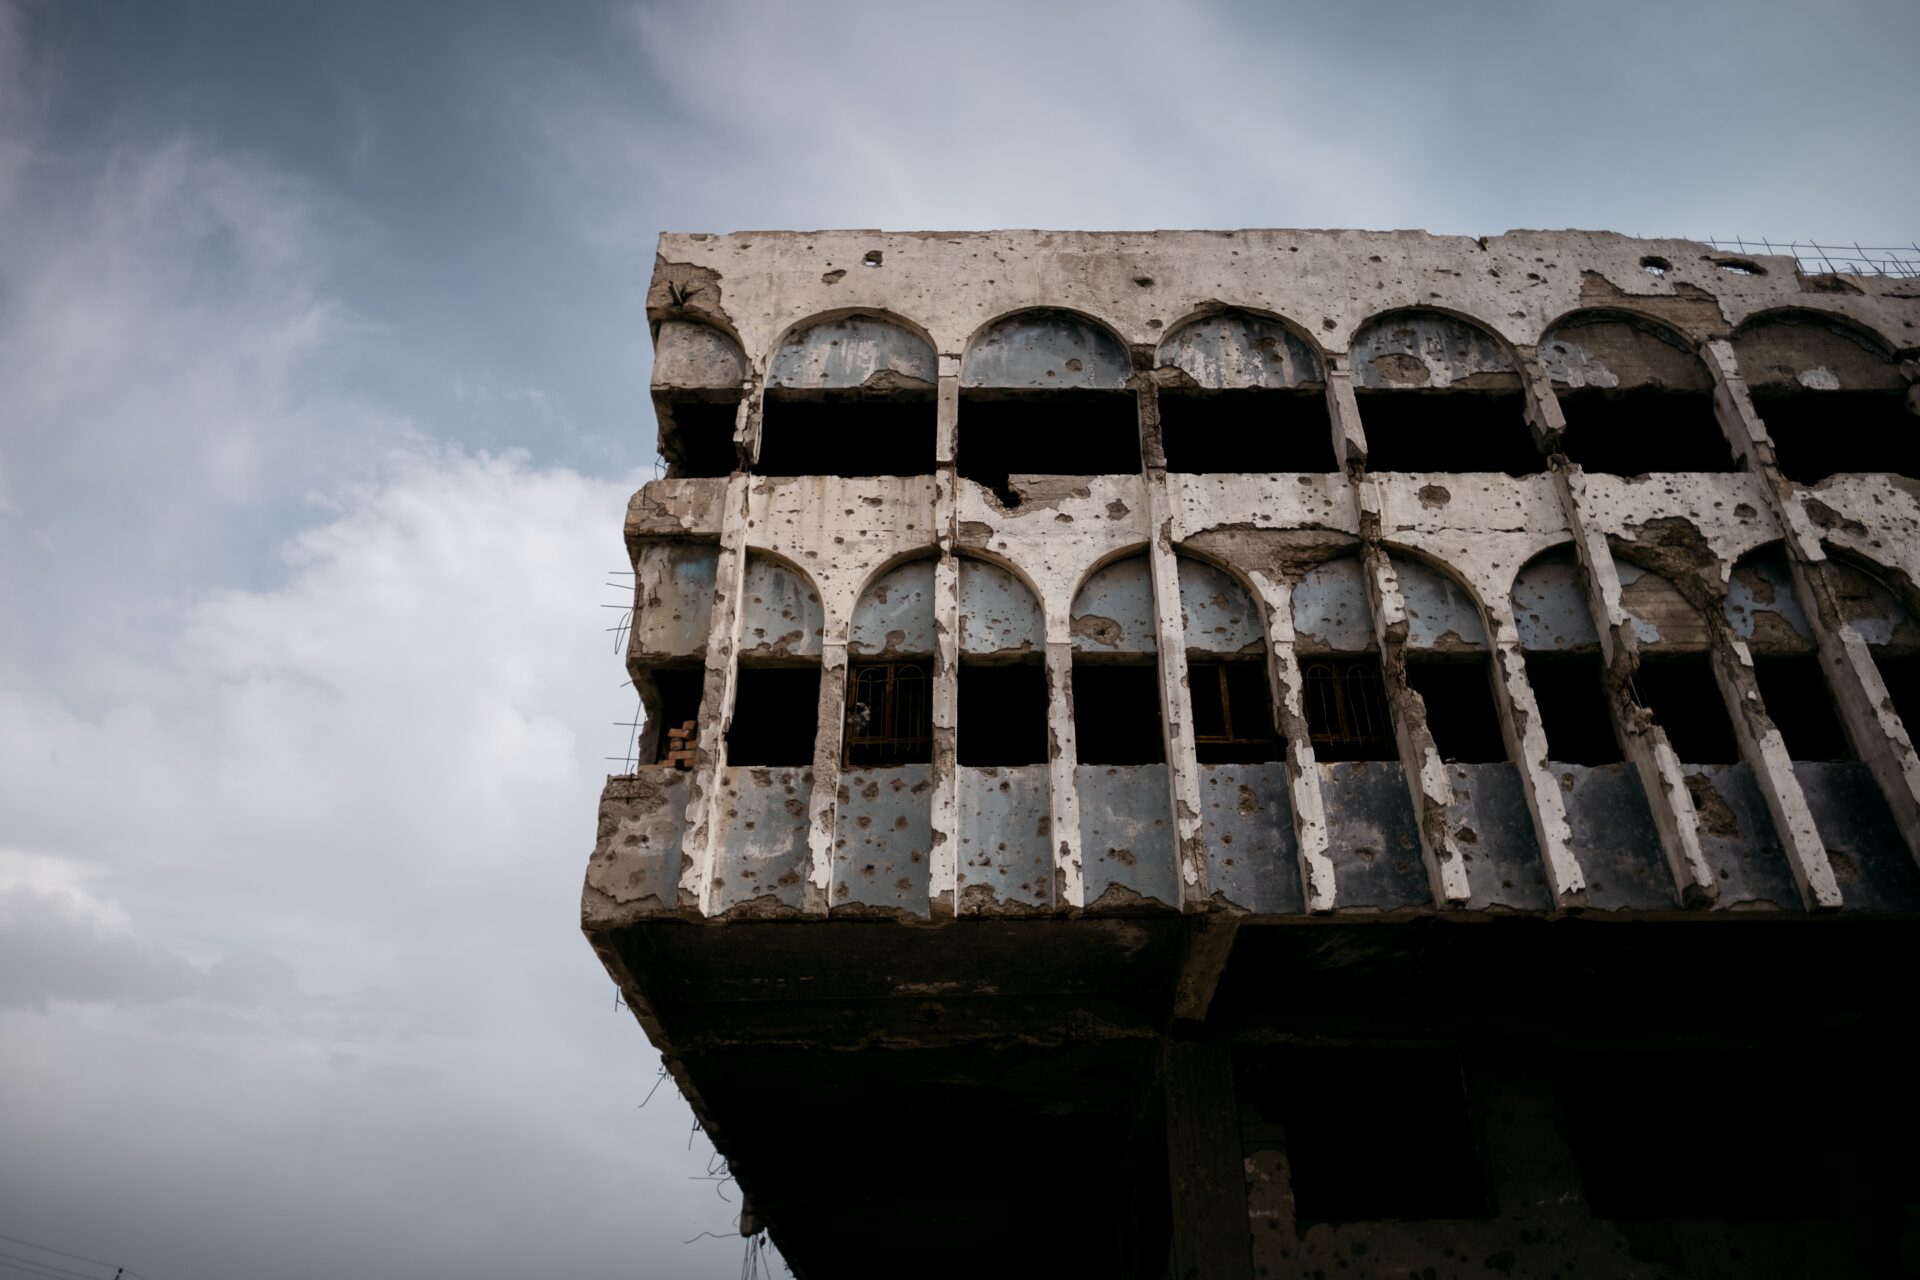 A destroyed building on the corniche along the Tigris in Mosul, following battles with ISIS (Photo by Levi Meir Clancy via Unsplash)